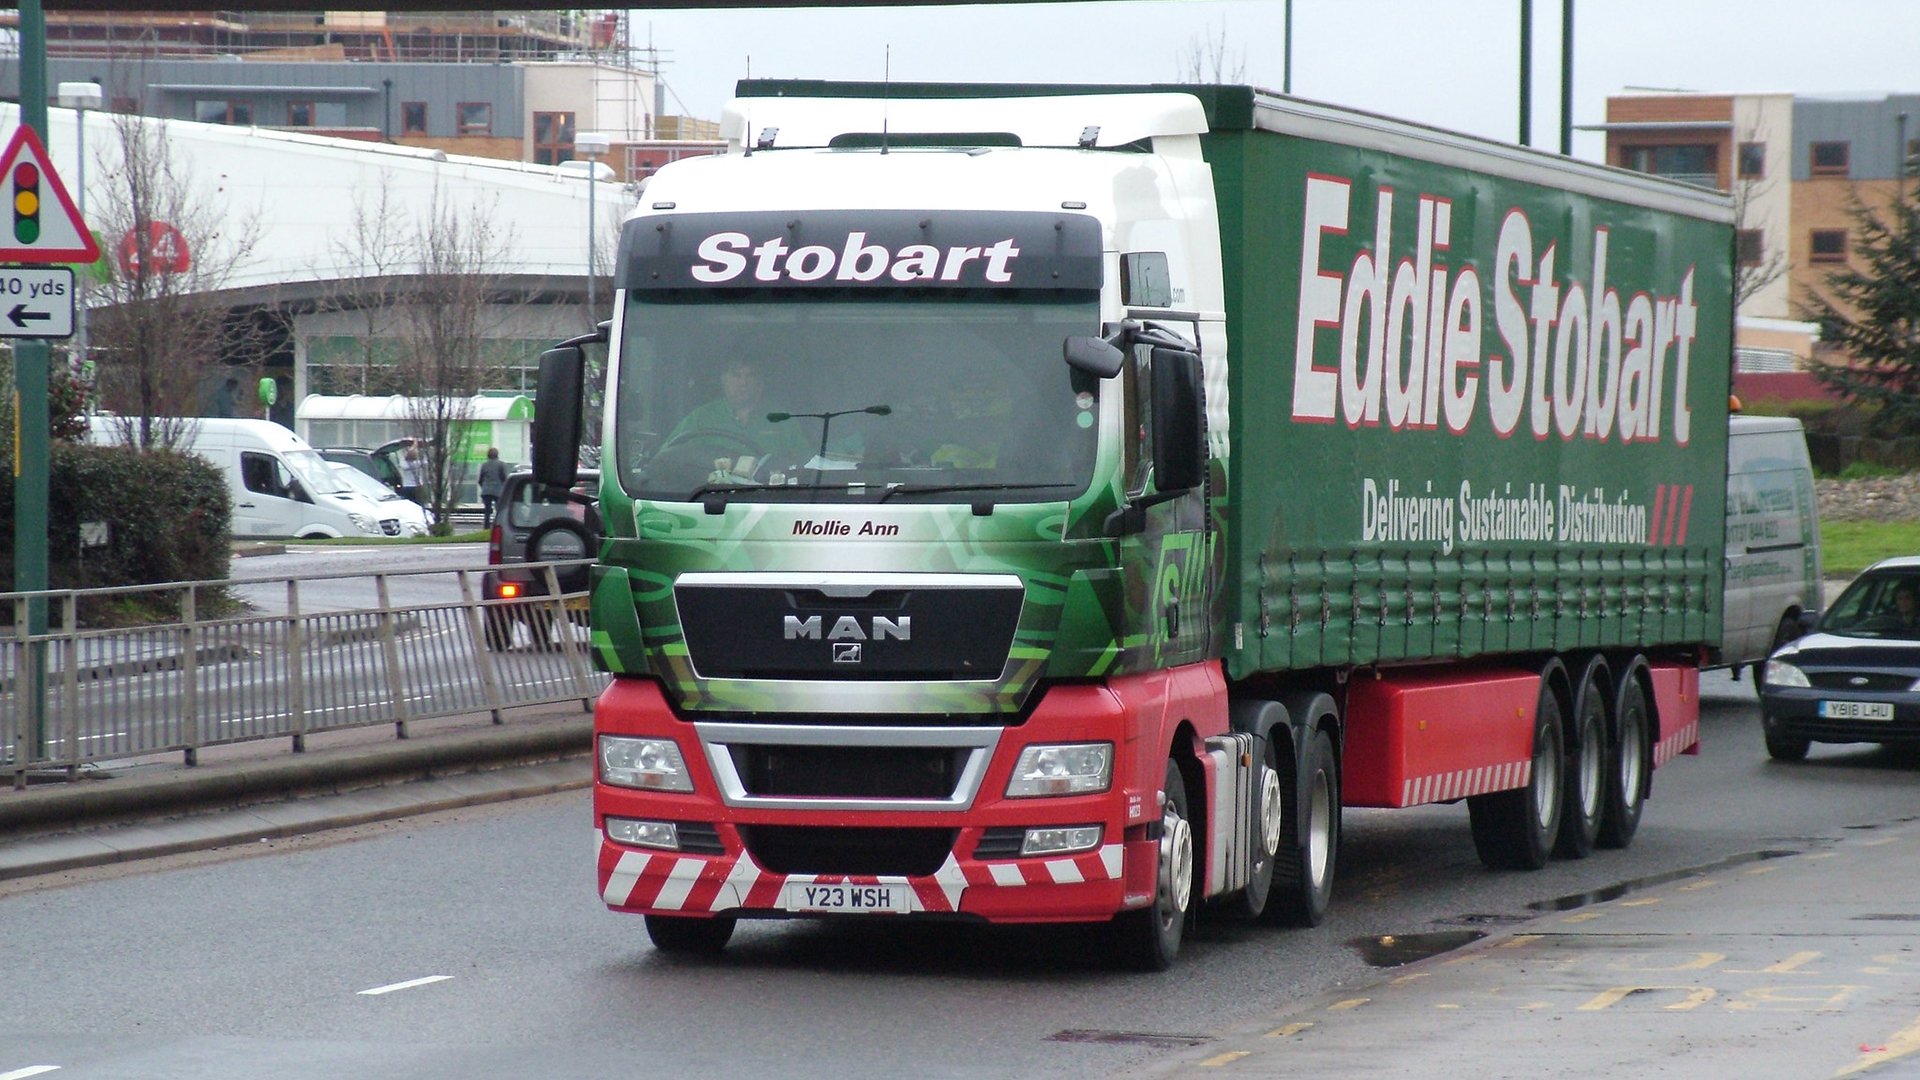 How to name an Eddie Stobart after someone | Auto Trader UK